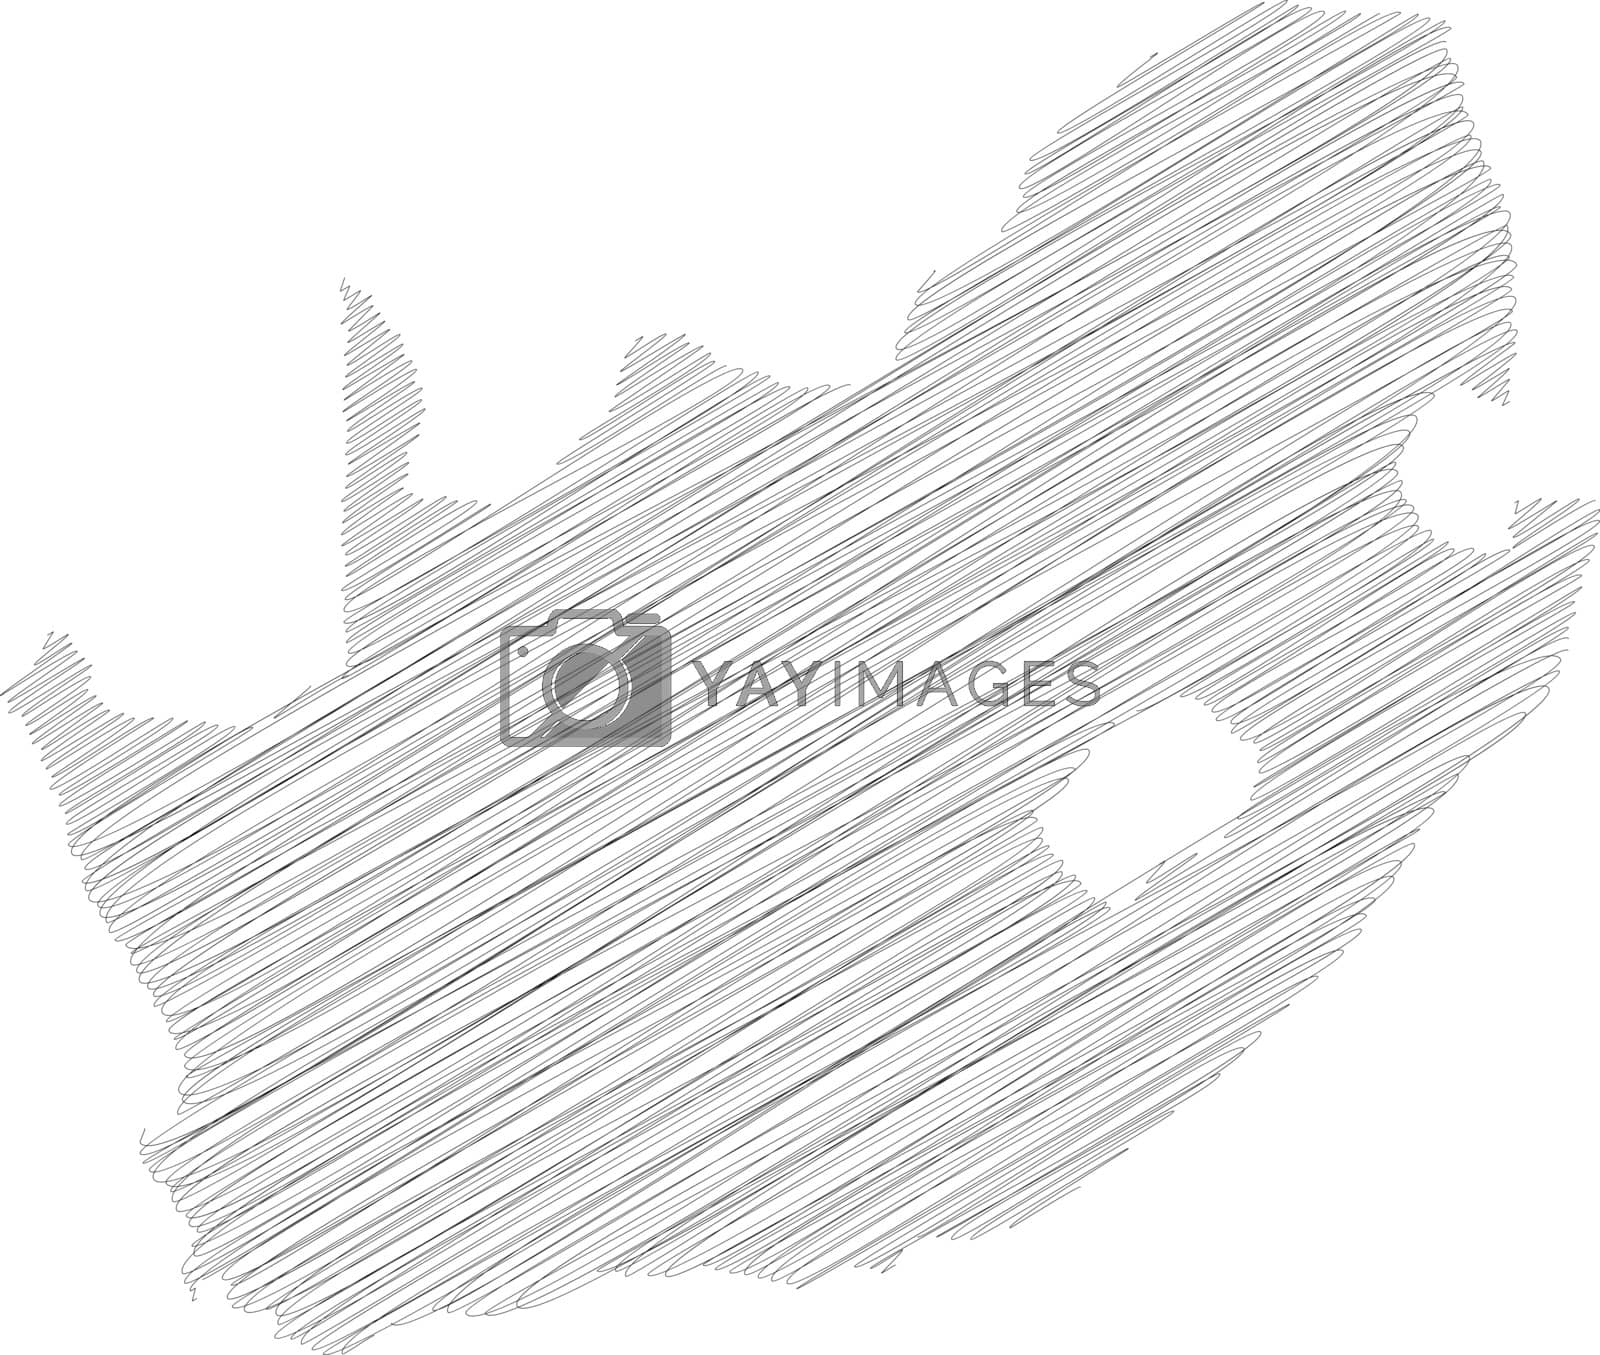 Royalty free image of South Africa - solid black silhouette map of country area. Simple flat vector illustration by pyty